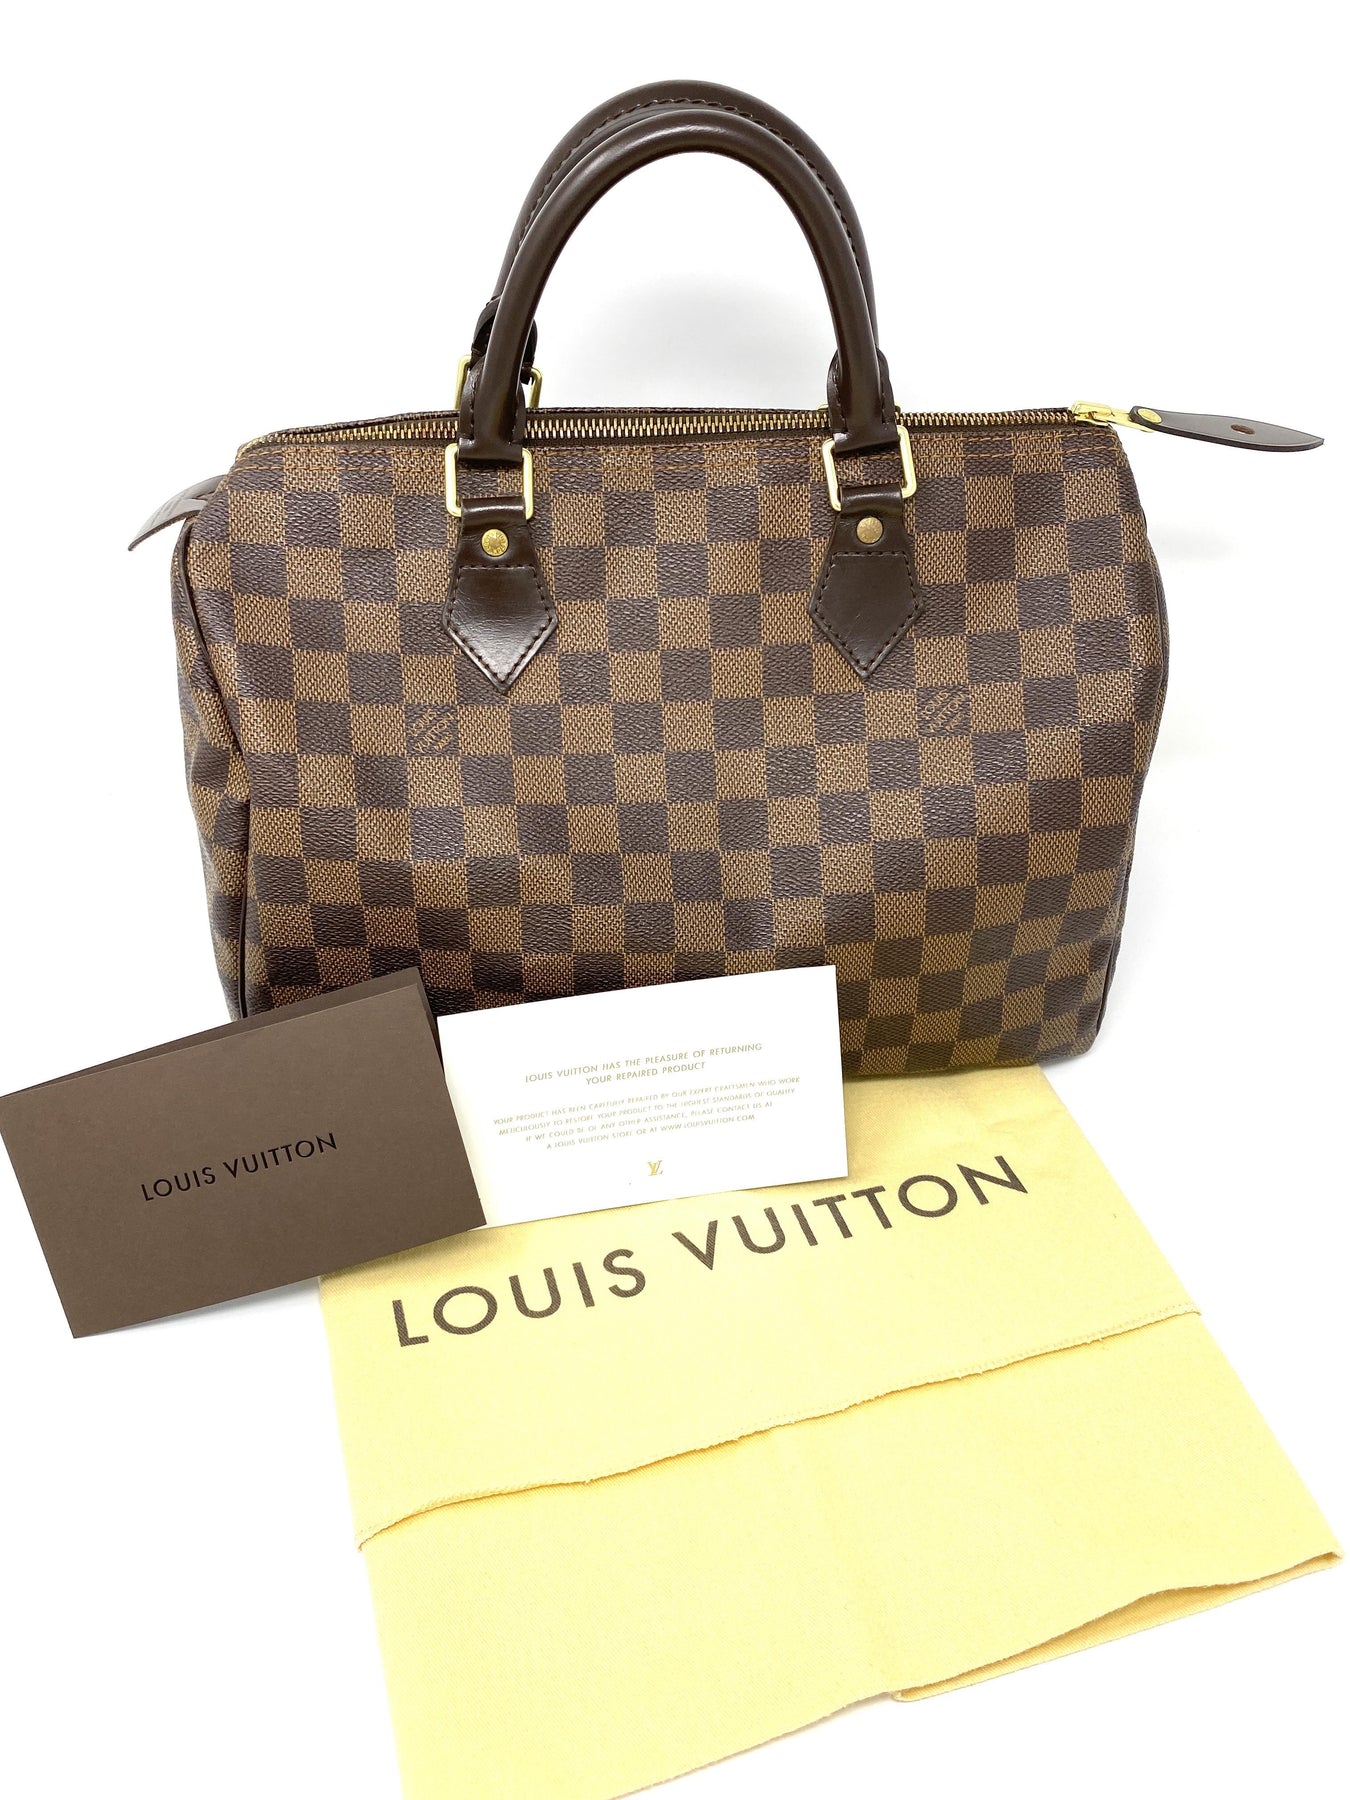 The history of: Louis Vuitton Damier Ebene Canvas and Damier Azur